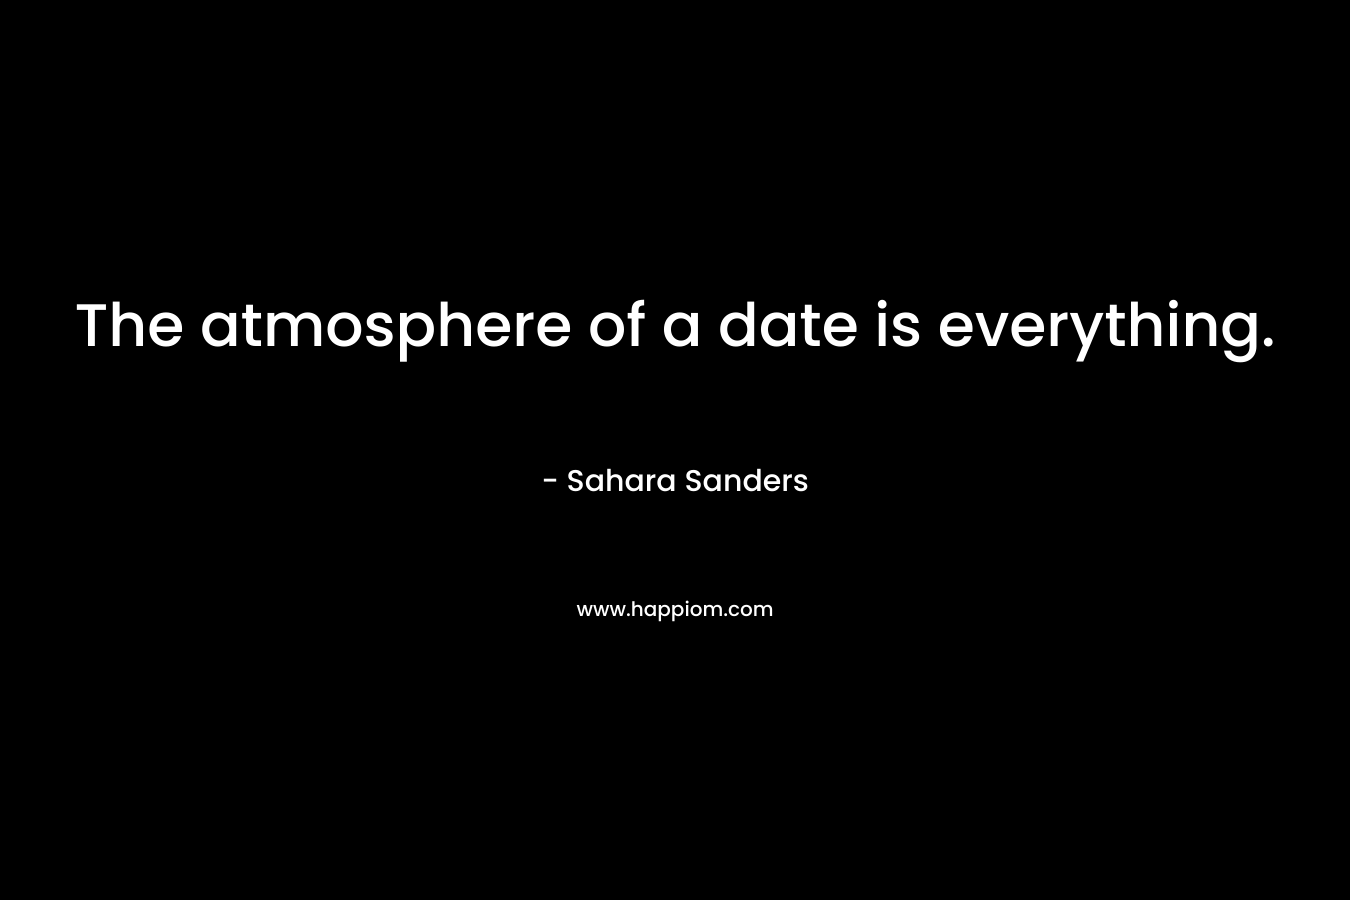 The atmosphere of a date is everything. – Sahara Sanders